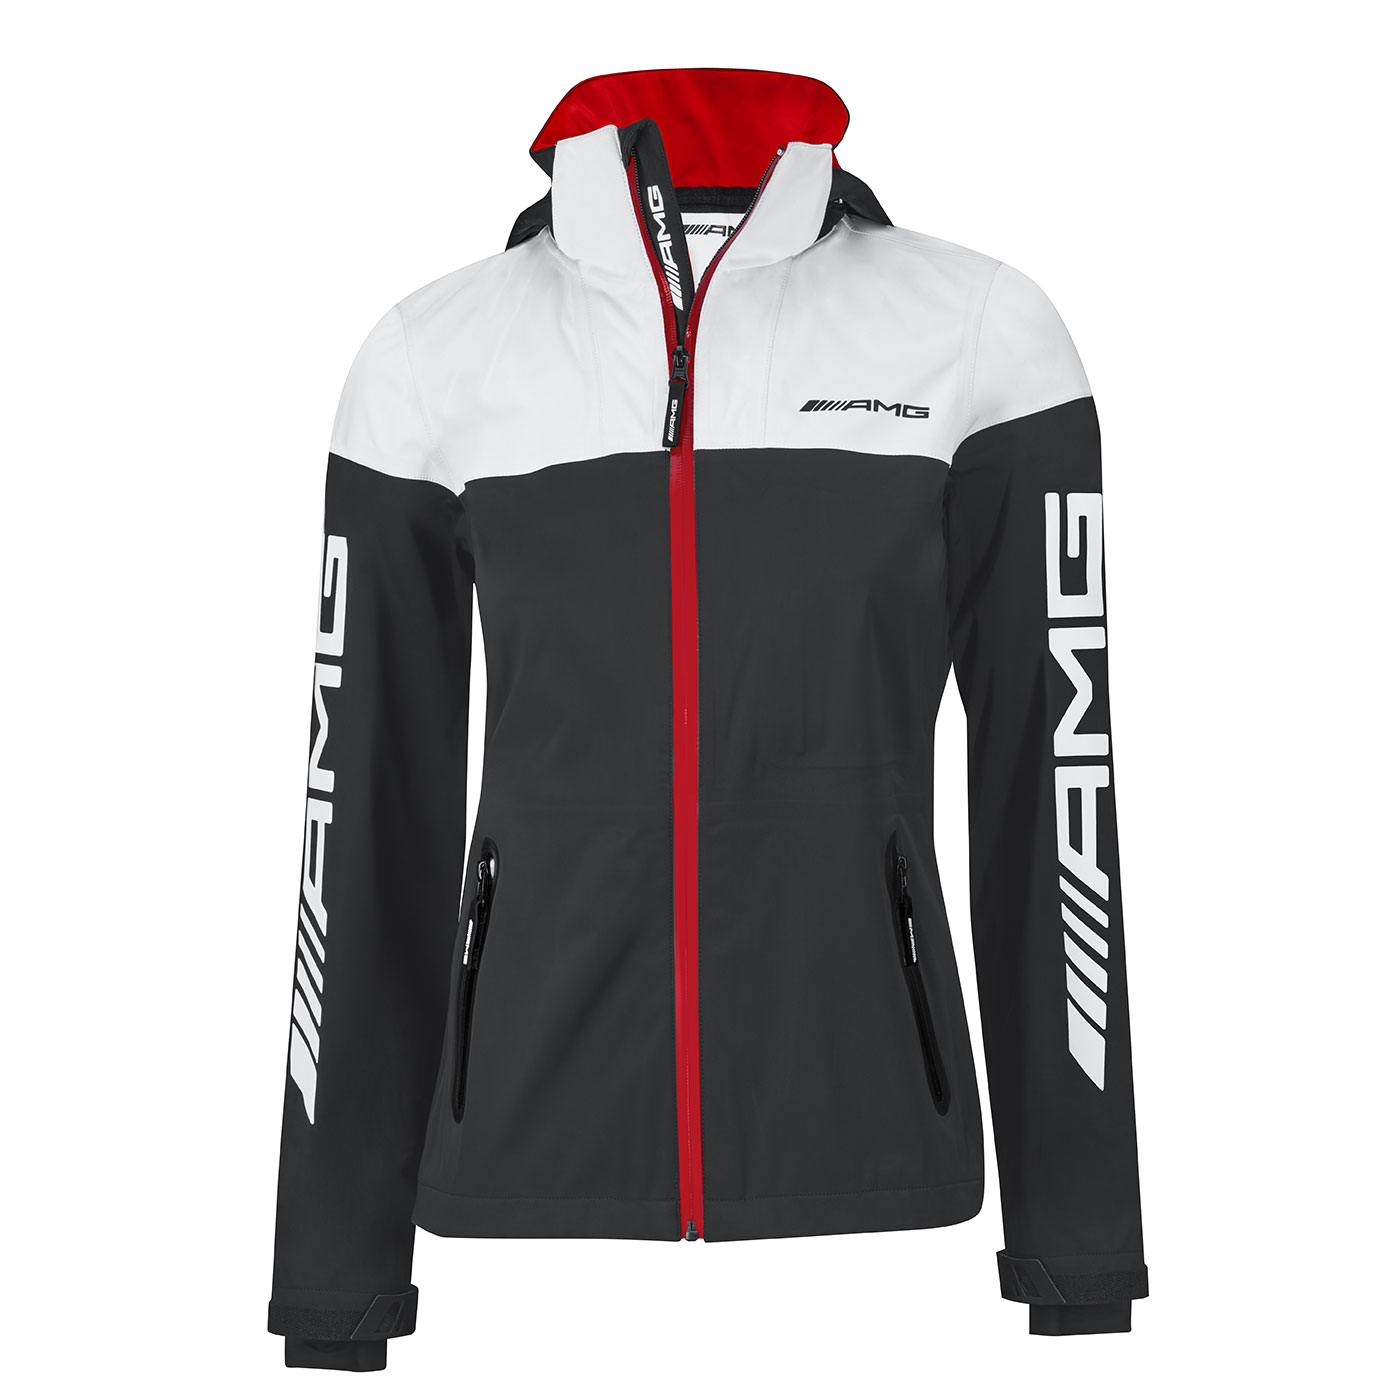 AMG ladies' softshell jacket | Mercedes-Benz Lifestyle Collection